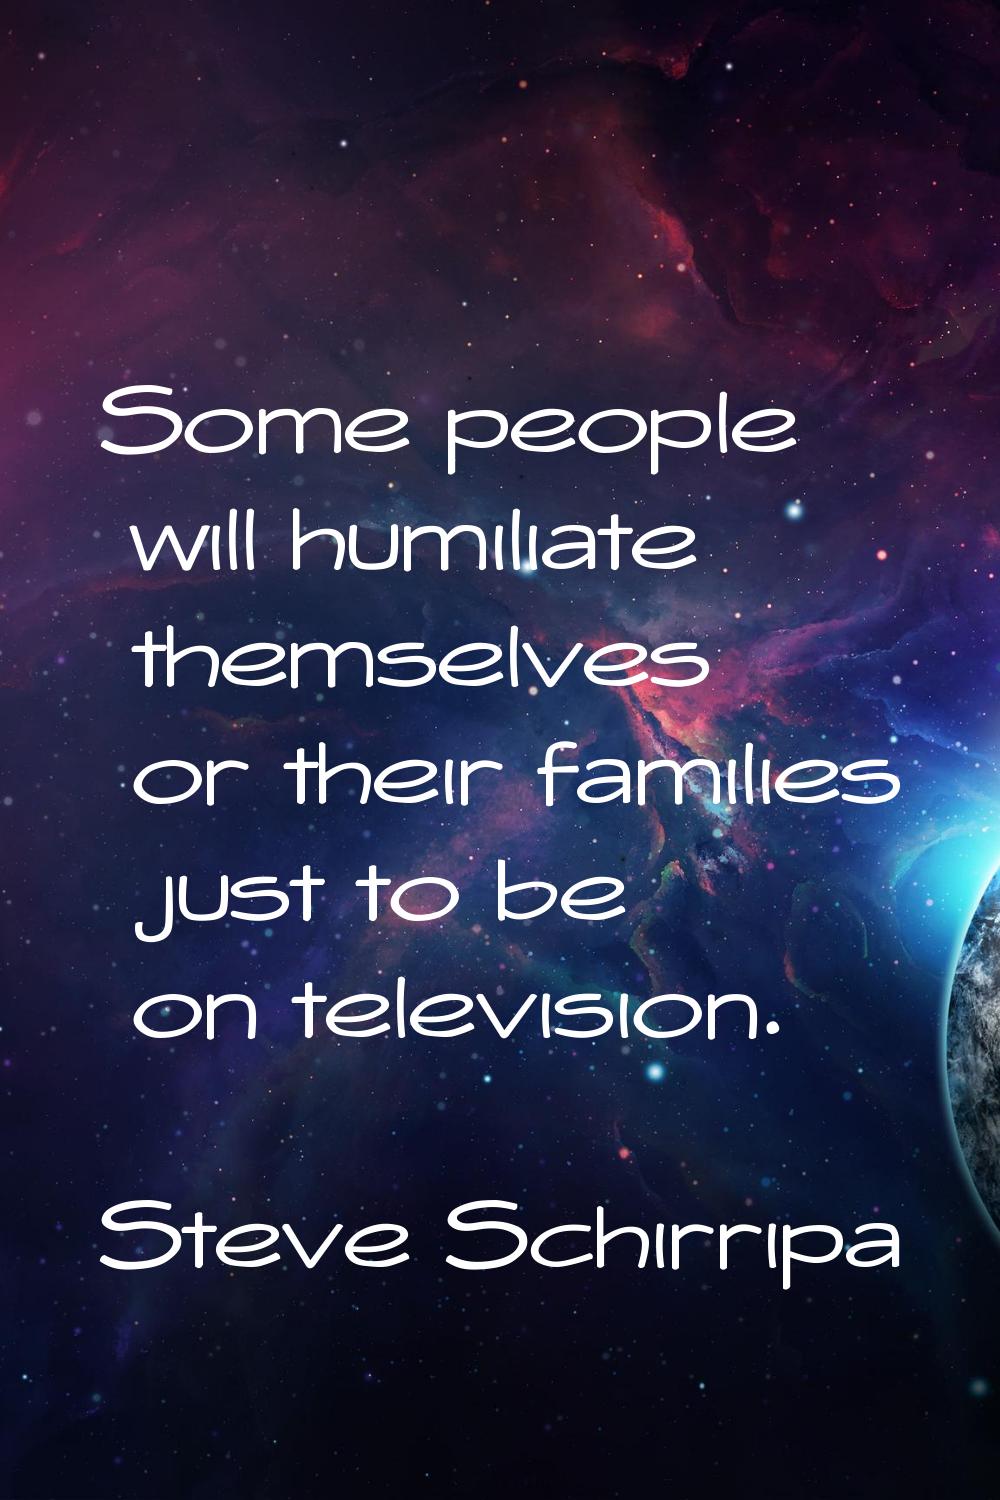 Some people will humiliate themselves or their families just to be on television.